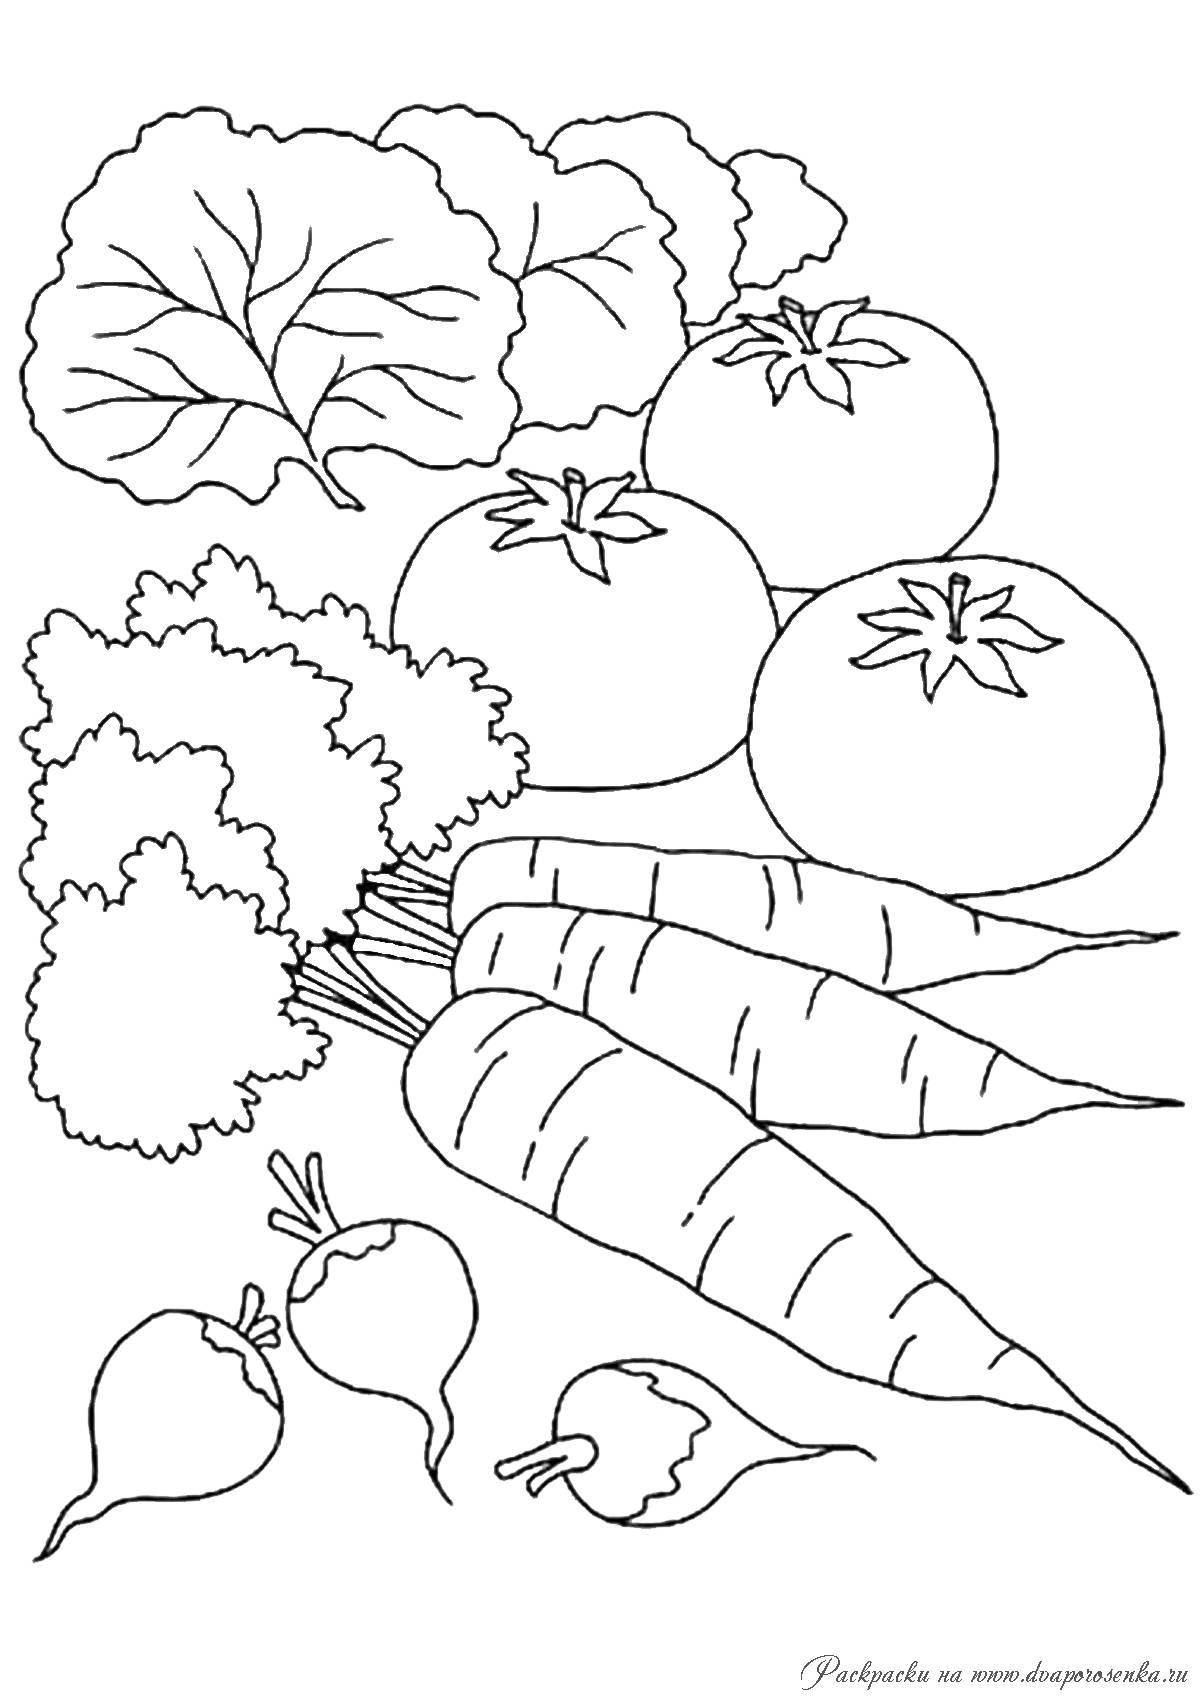 Coloring book with colored vegetables for children 3-4 years old